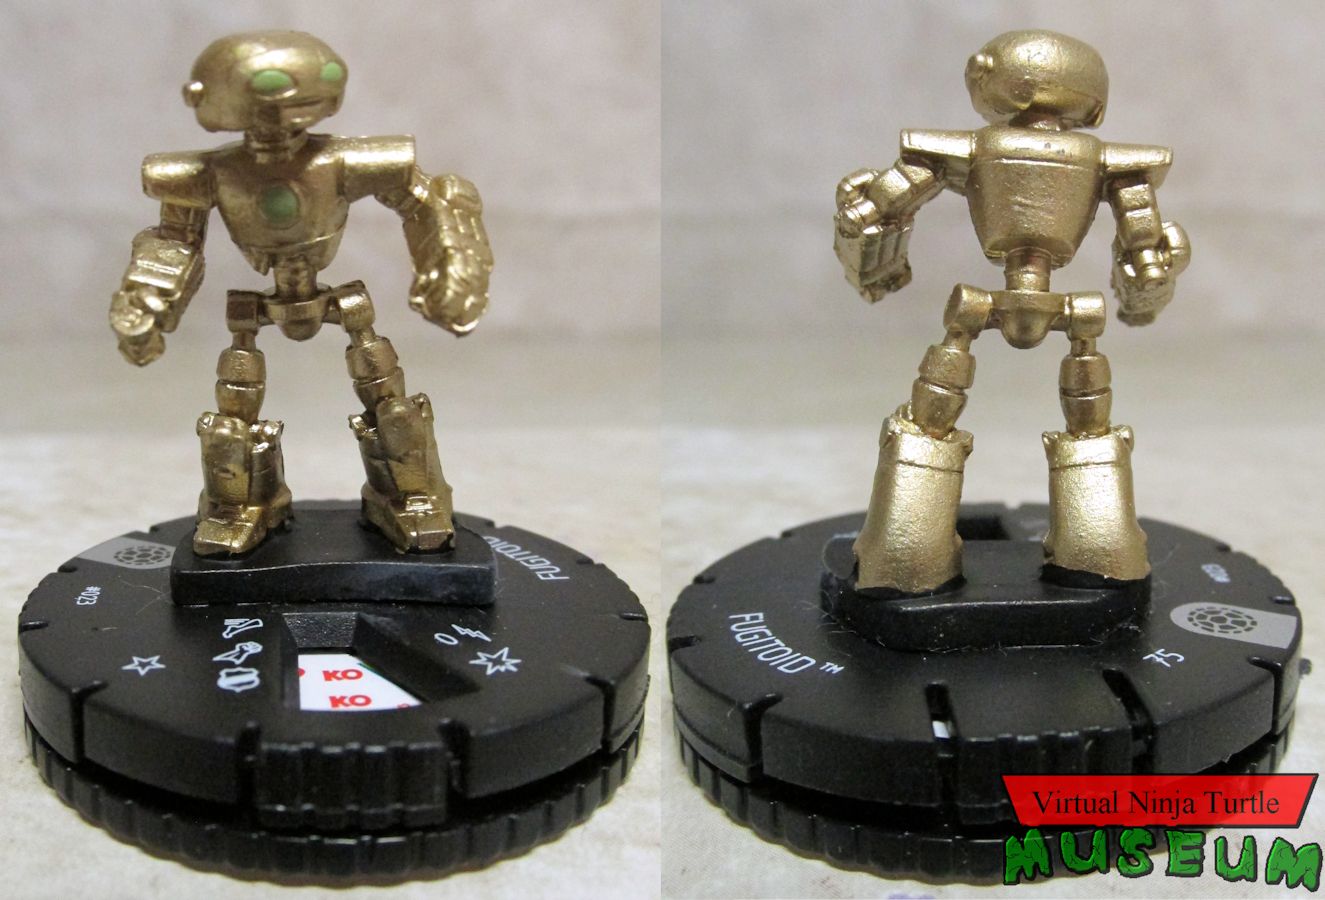 023 Fugitoid front and back